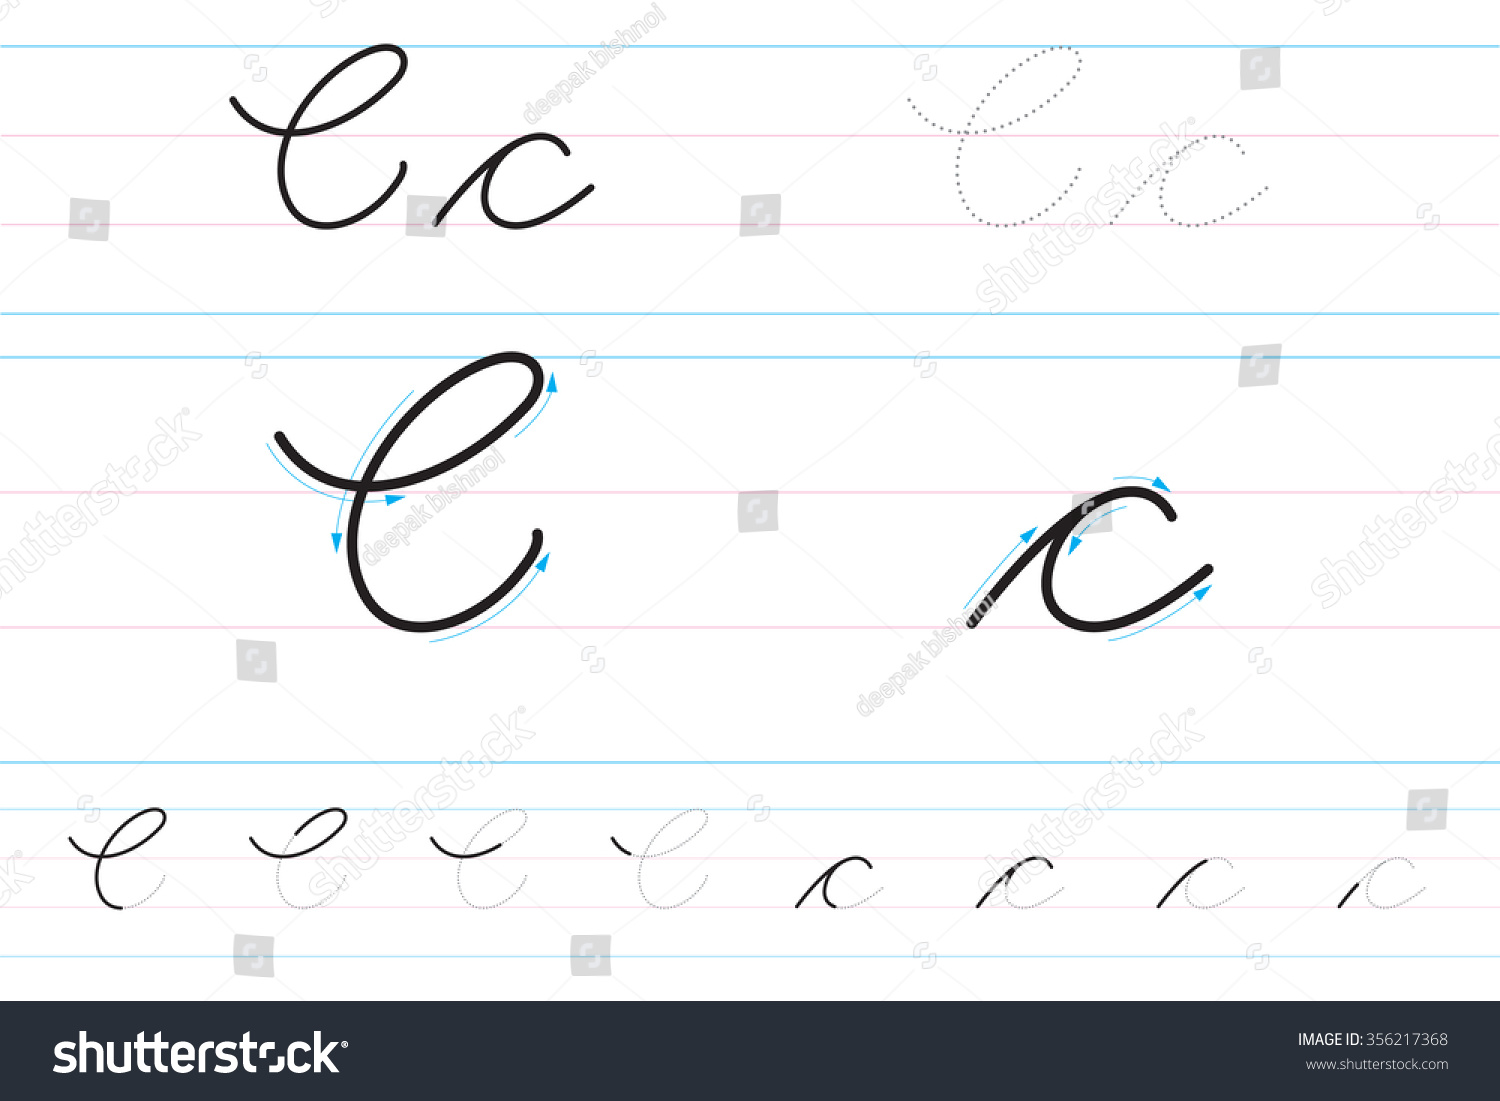 Cursive Letters Learning Write Cc Stock Vector (Royalty Free